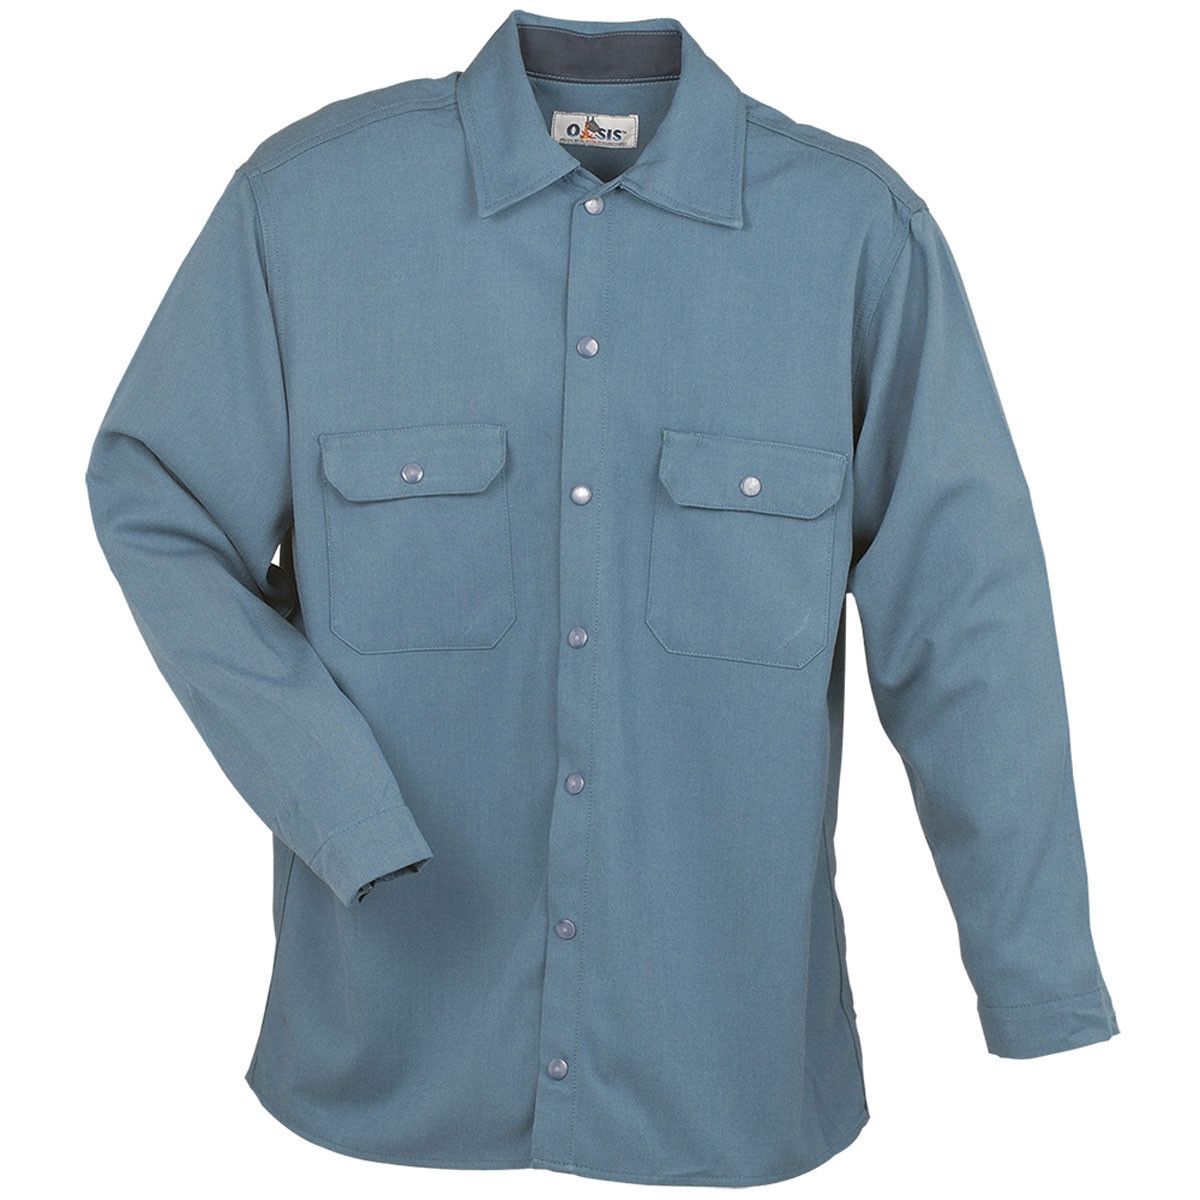 What type of closures are used in these work shirts?